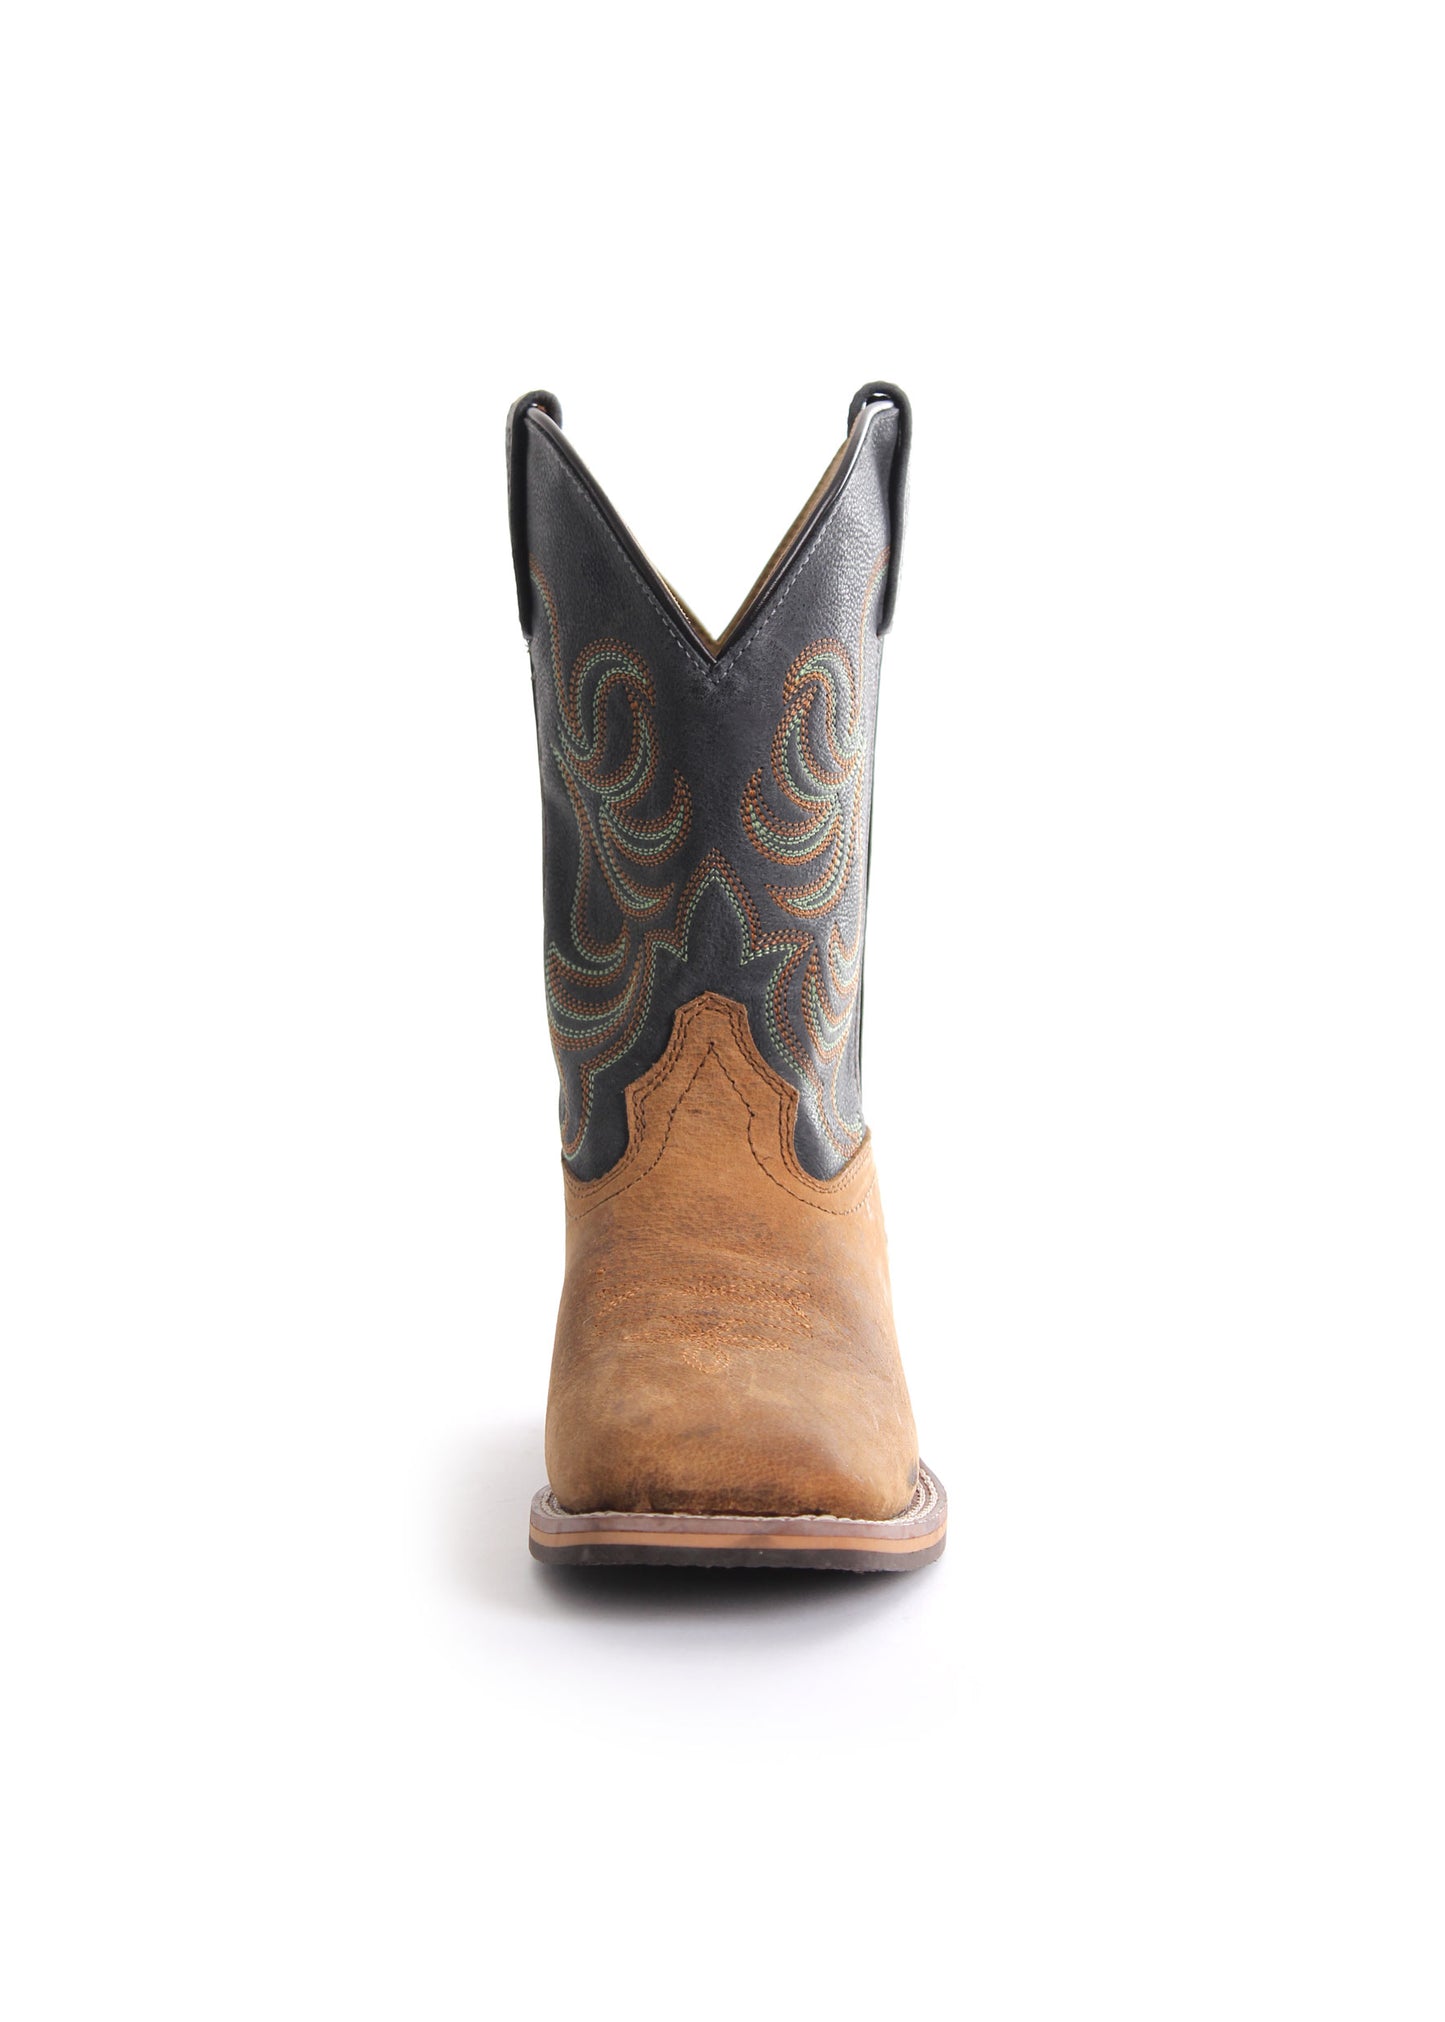 Pure Western "Cole" Childrens Boot - Oil Distressed Rust/Navy